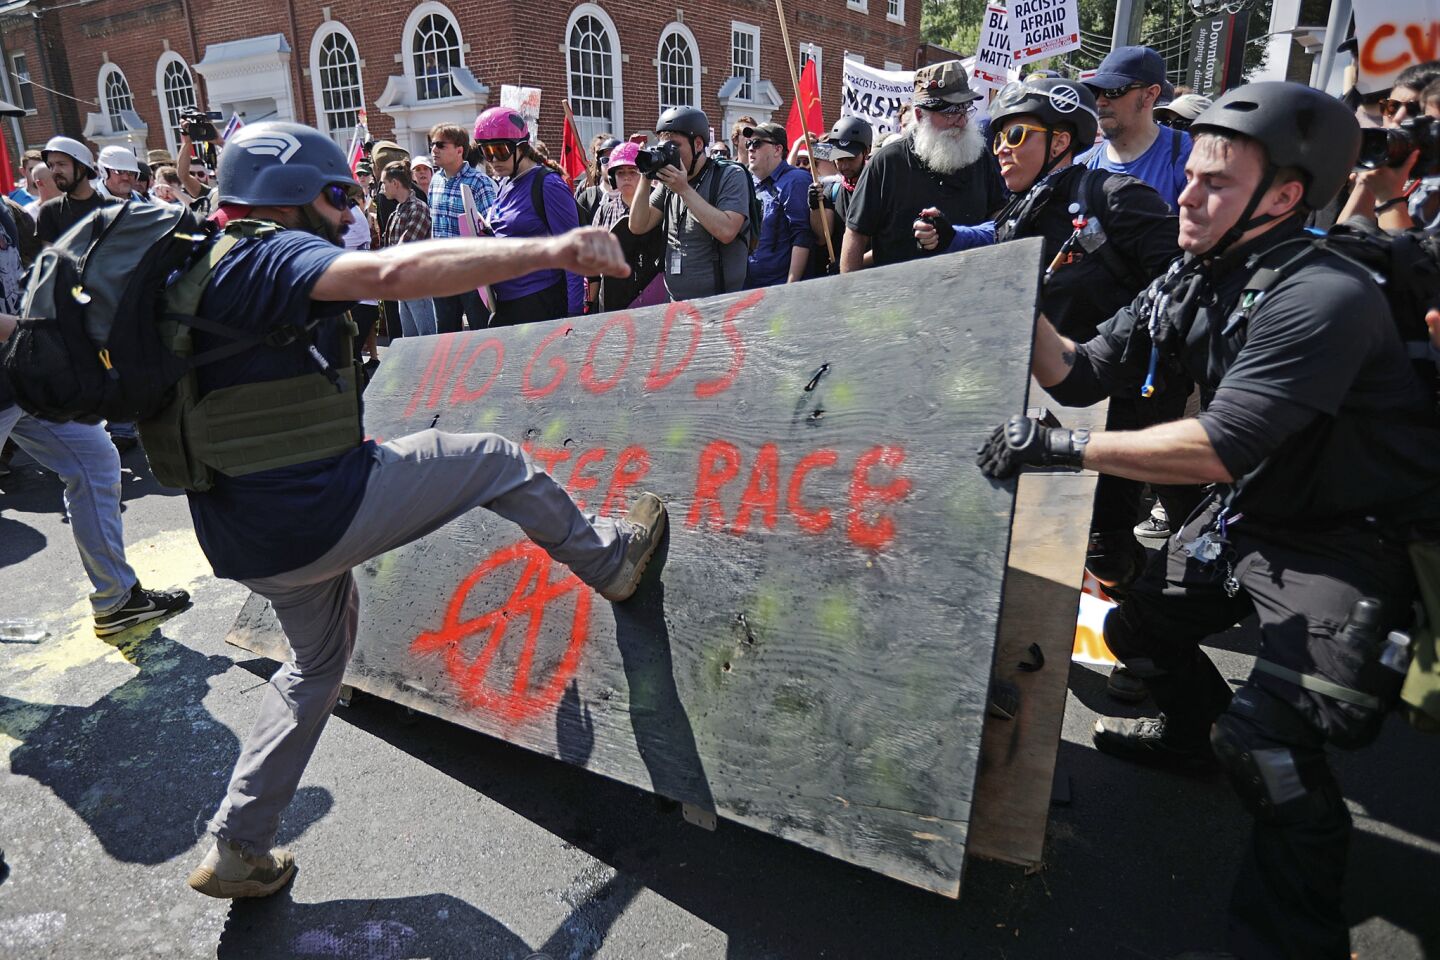 A man kicks a protest sign during the "Unite the Right" rally in Charlottesville, Va.